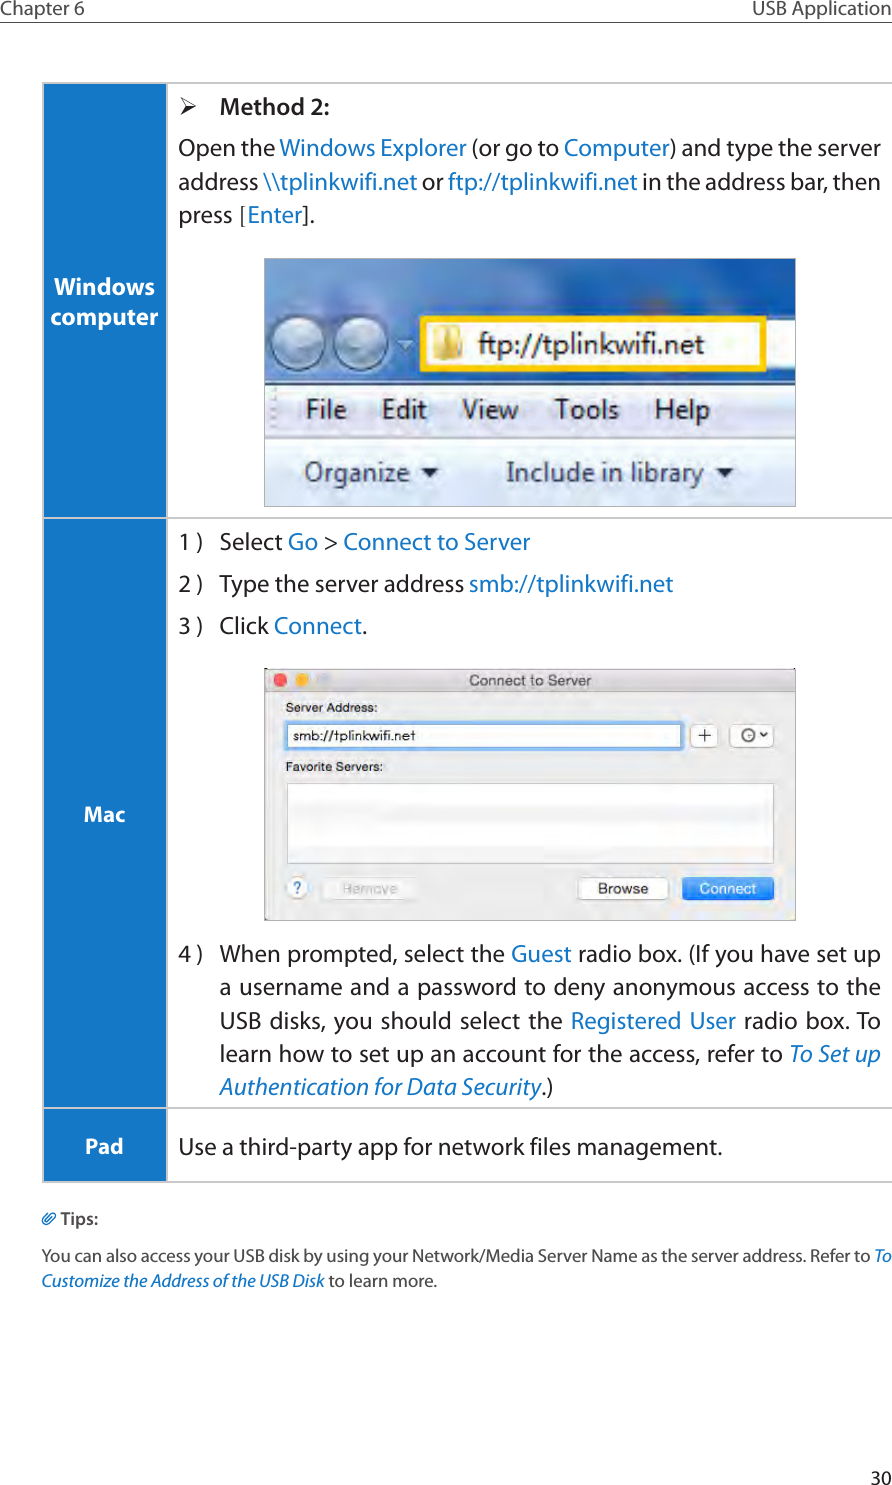 30Chapter 6 USB ApplicationWindows computer ¾Method 2:Open the Windows Explorer (or go to Computer) and type the server address \\tplinkwifi.net or ftp://tplinkwifi.net in the address bar, then press [Enter].Mac1 )  Select Go &gt; Connect to Server2 )  Type the server address smb://tplinkwifi.net 3 )  Click Connect.4 )  When prompted, select the Guest radio box. (If you have set up a username and a password to deny anonymous access to the USB disks, you should select the Registered User radio box. To learn how to set up an account for the access, refer to To Set up Authentication for Data Security.)Pad Use a third-party app for network files management.Tips:You can also access your USB disk by using your Network/Media Server Name as the server address. Refer to To Customize the Address of the USB Disk to learn more.